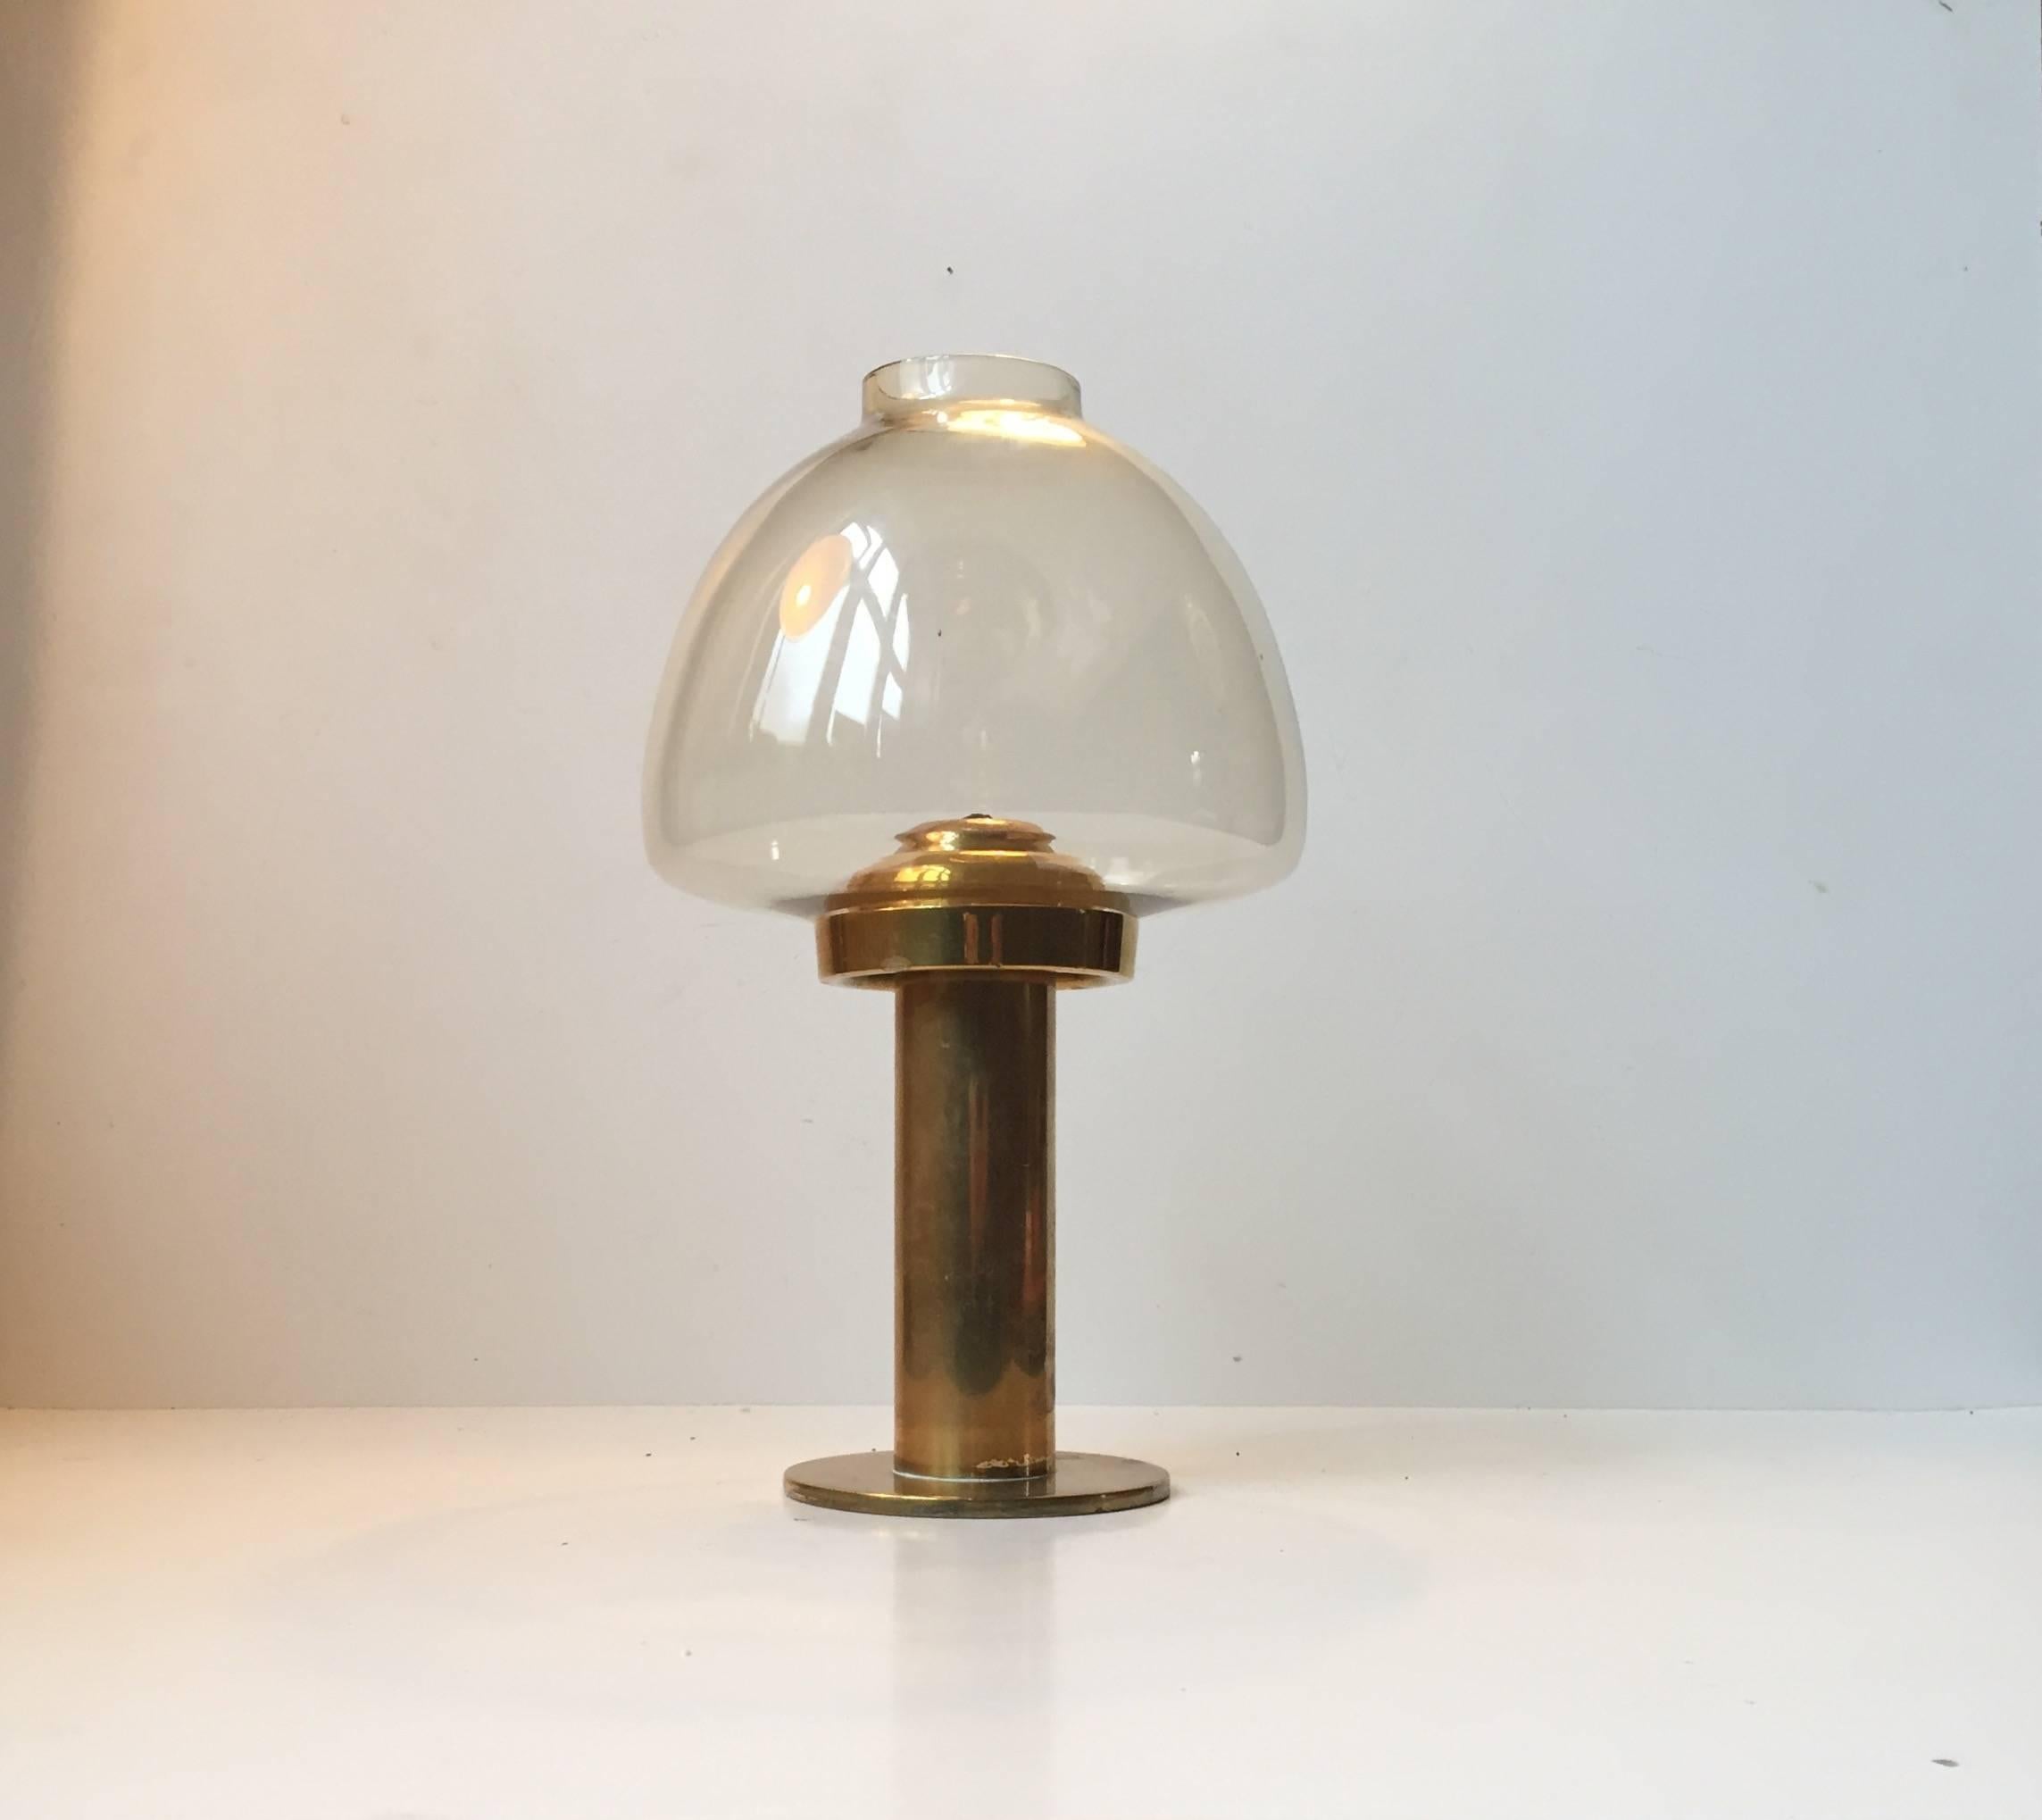 This candleholder Model L102 features a mouth-blown smoked hurricane glass shade and a brass base with a spring mechanism that pushes up the candle while it burns. This piece was designed by Hans Agne Jakobsson and manufactured by Markaryd AB. The